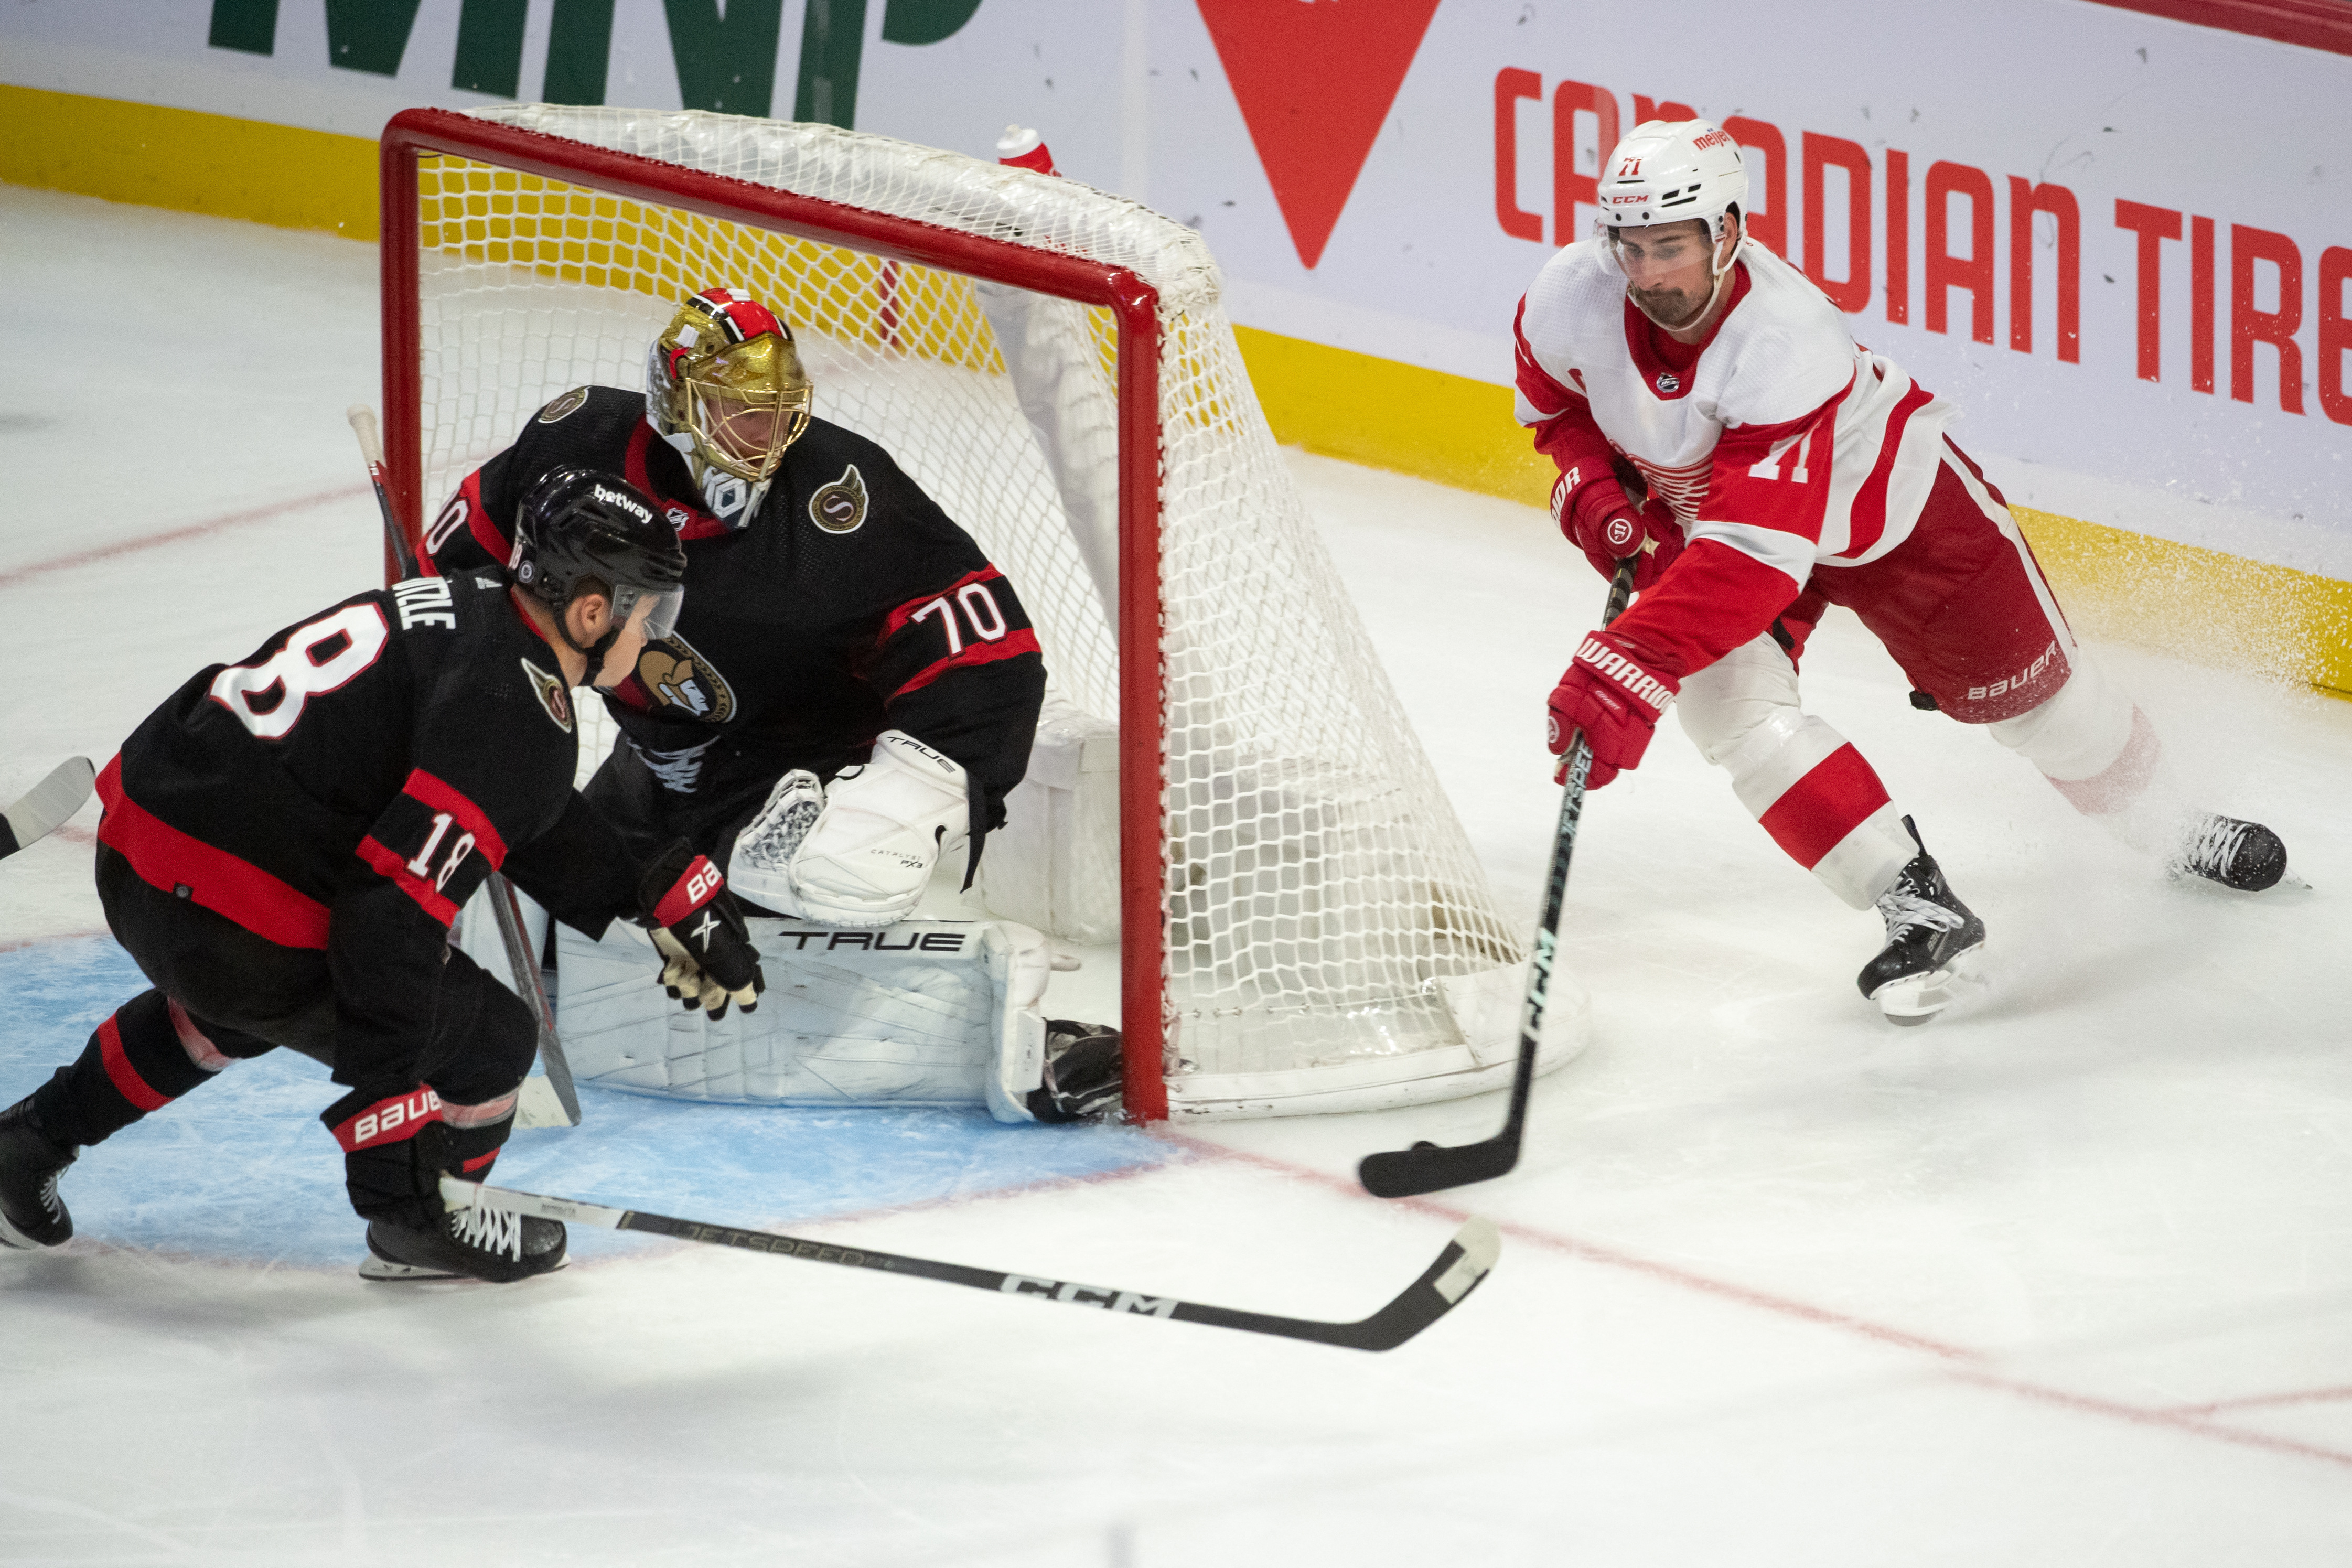 Veleno scores twice and Husso makes 35 saves as Red Wings beat Senators